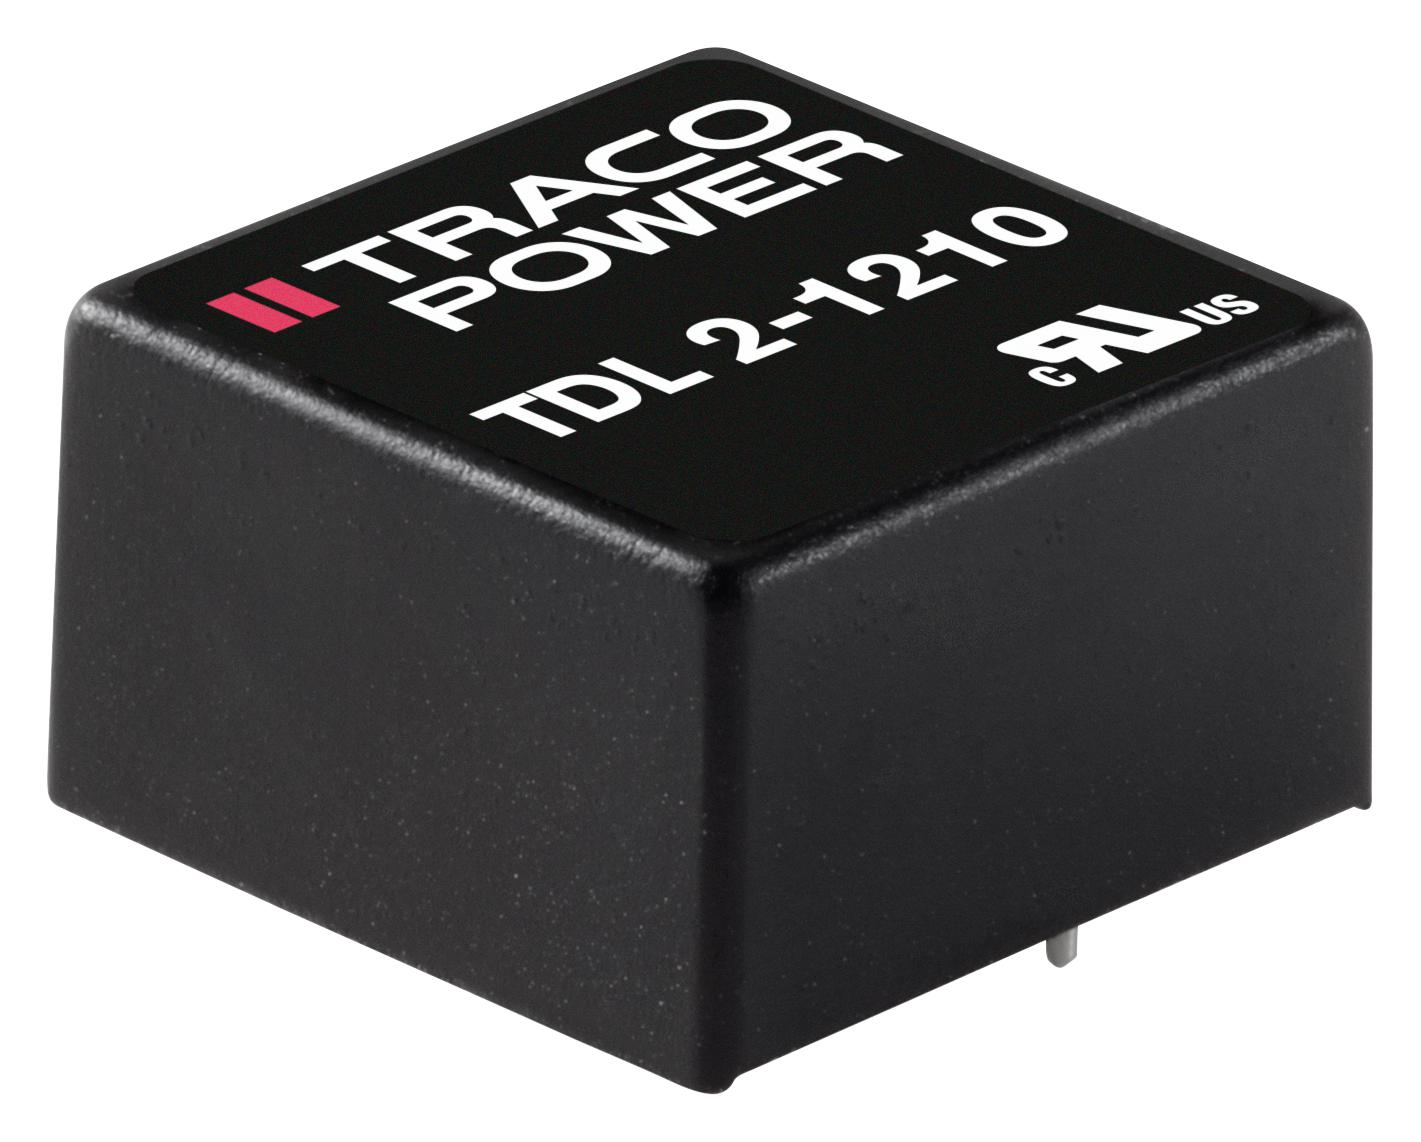 TDL 2-4821 DC-DC CONVERTER, 2 O/P, 2W TRACO POWER